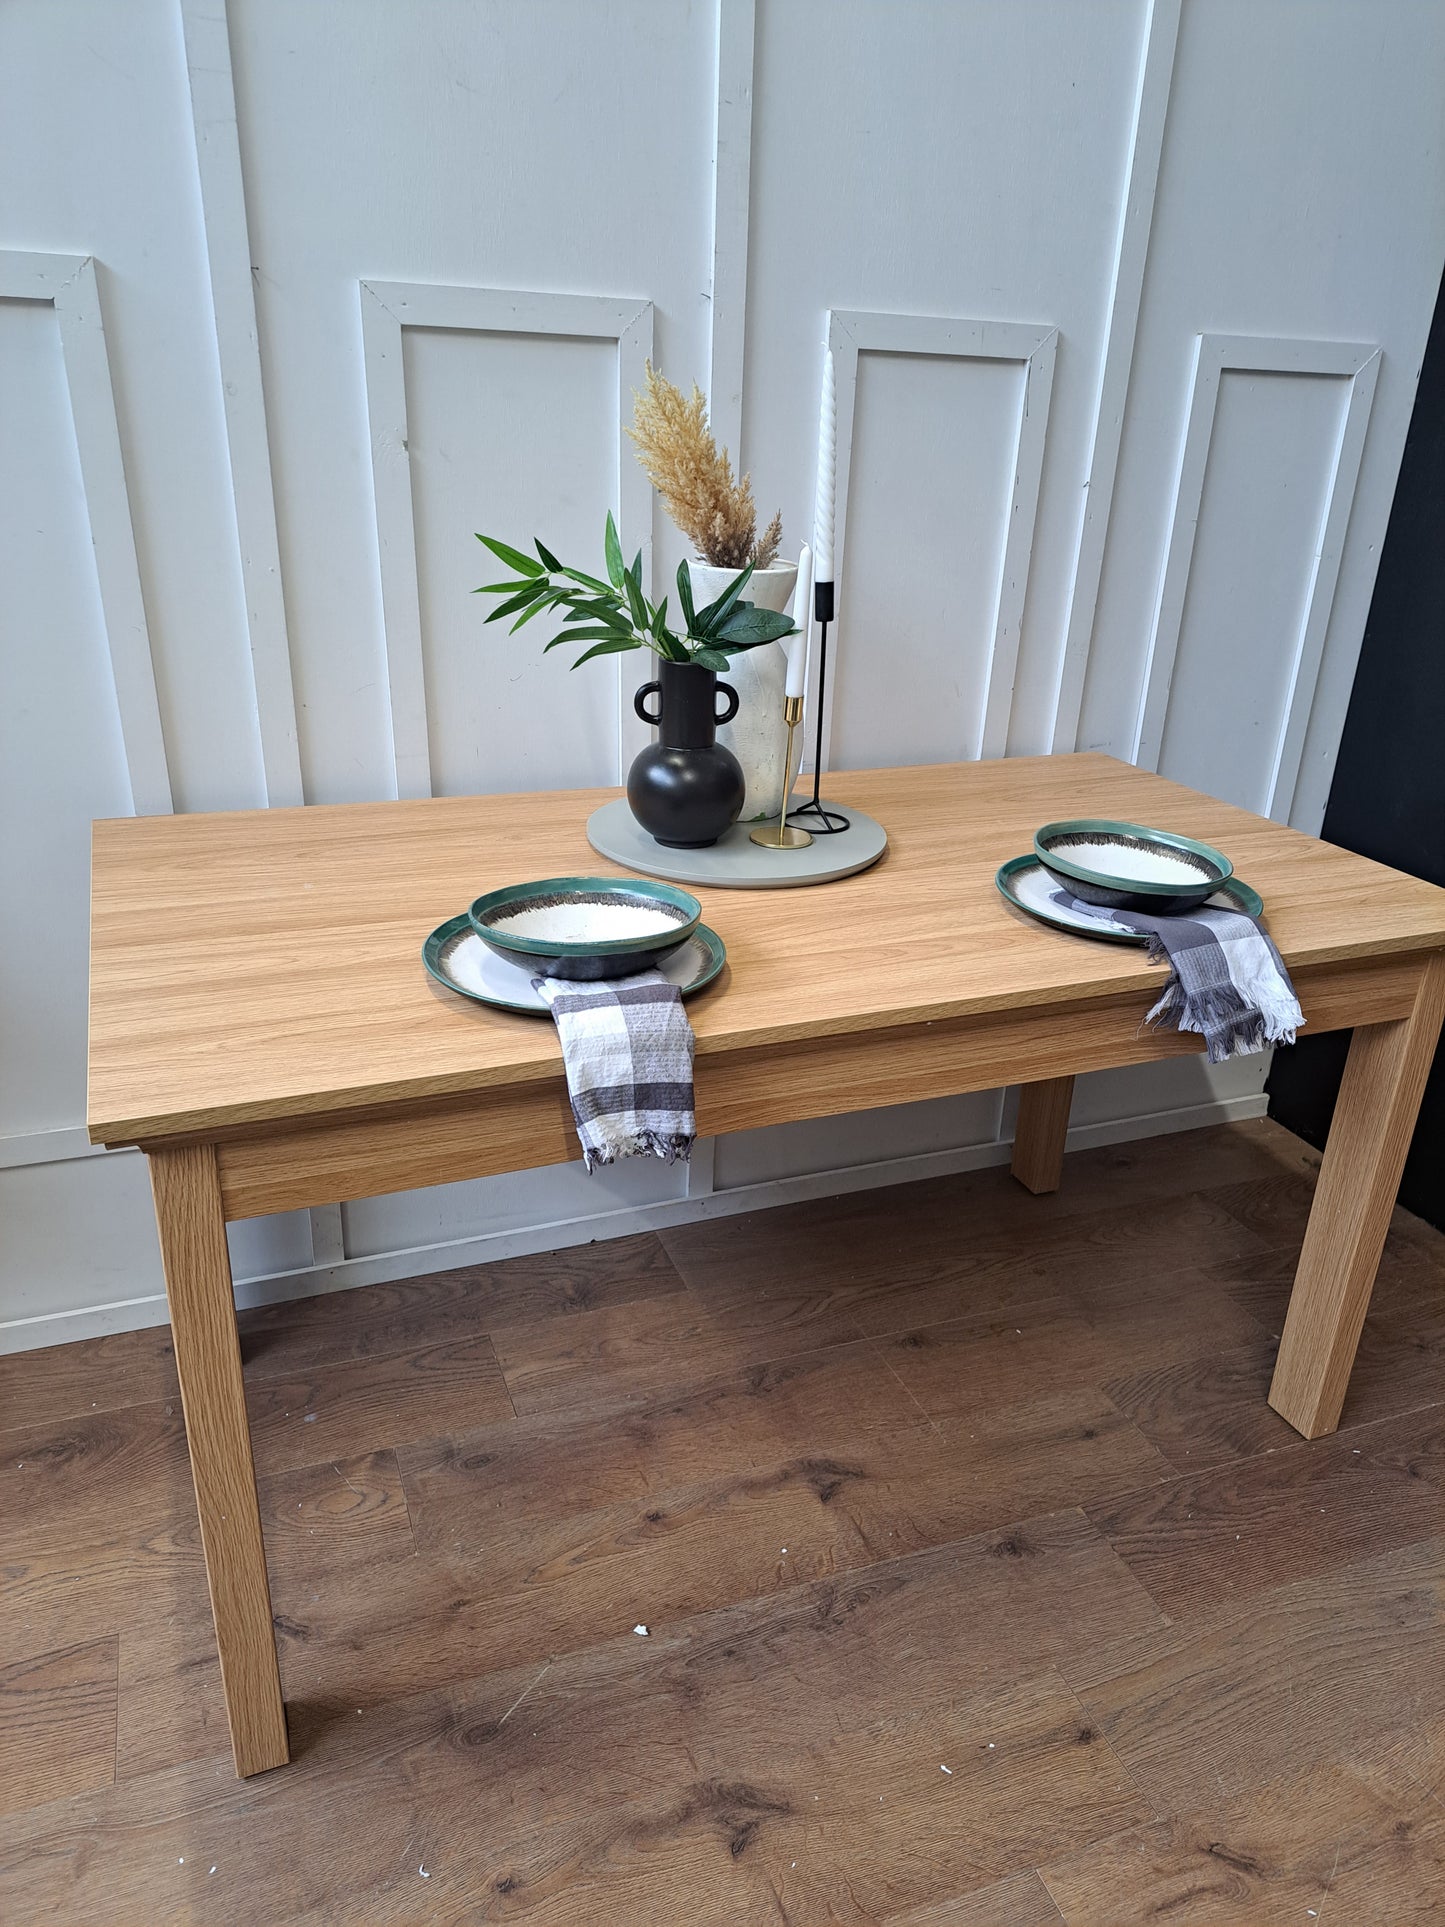 Large Dining Table Oak Wood Effect